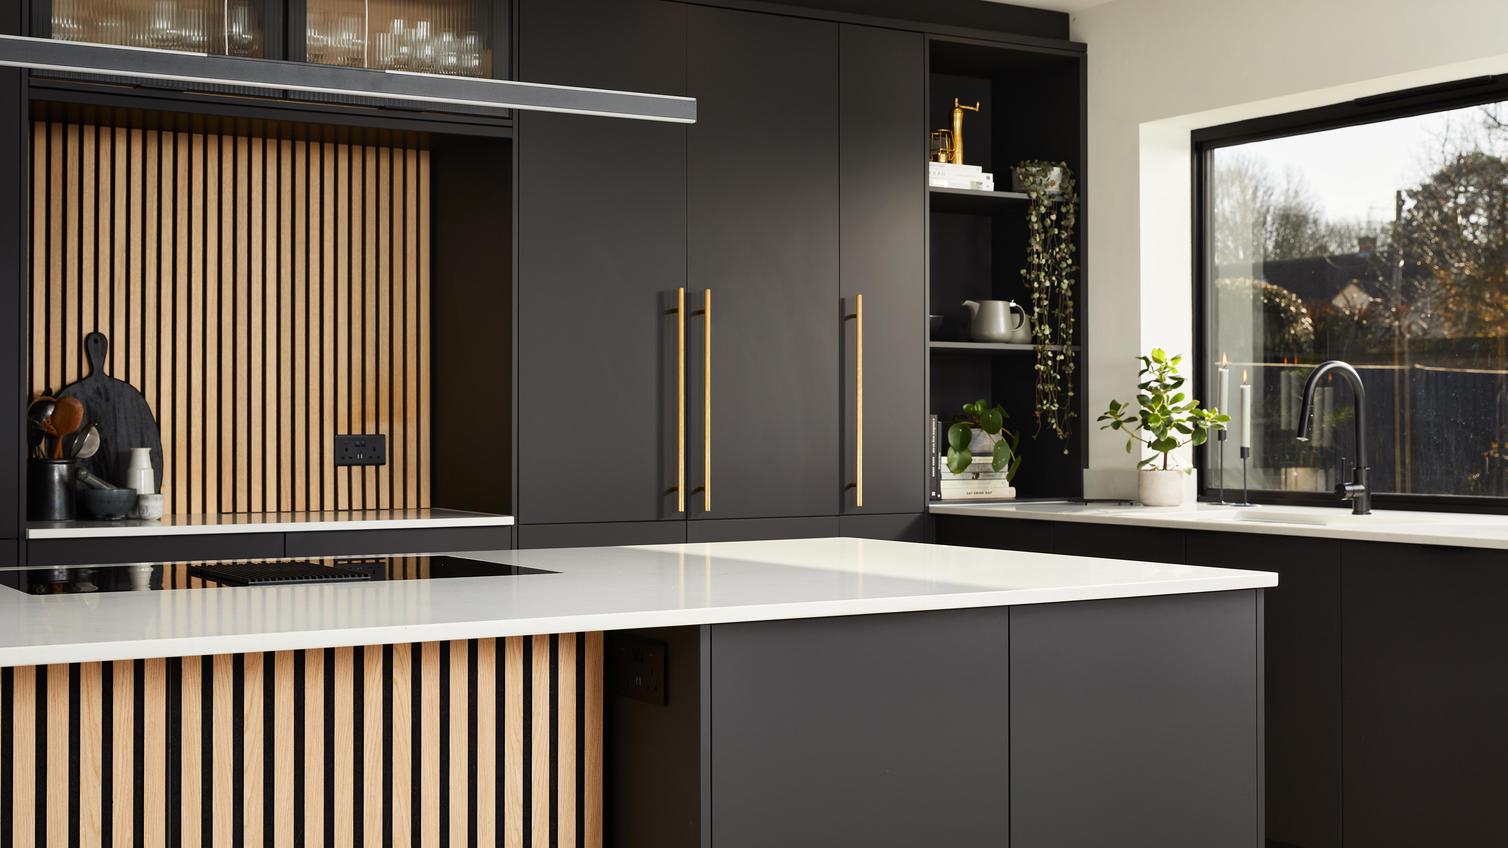 Howdens 2022 Kitchen Of The Year Winner's kitchen which includes black slab cupboard doors, oak panels, and white worktops.